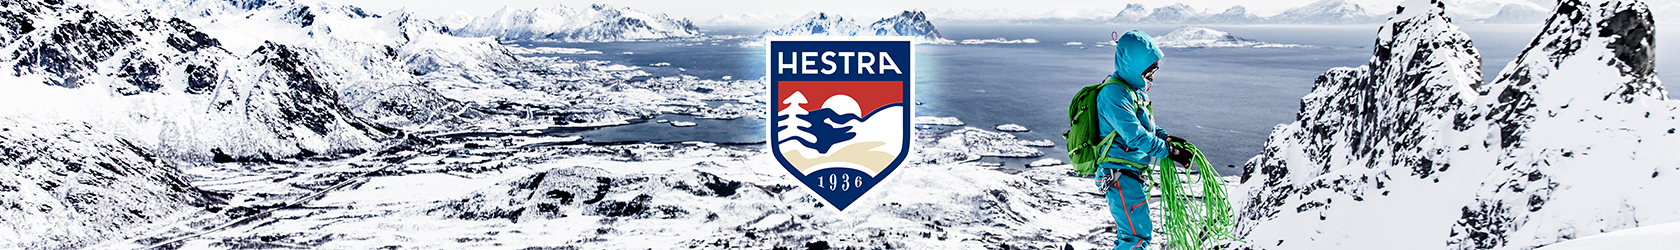 A person, wearing Hestra gloves, is preparing to climb snow mountains.